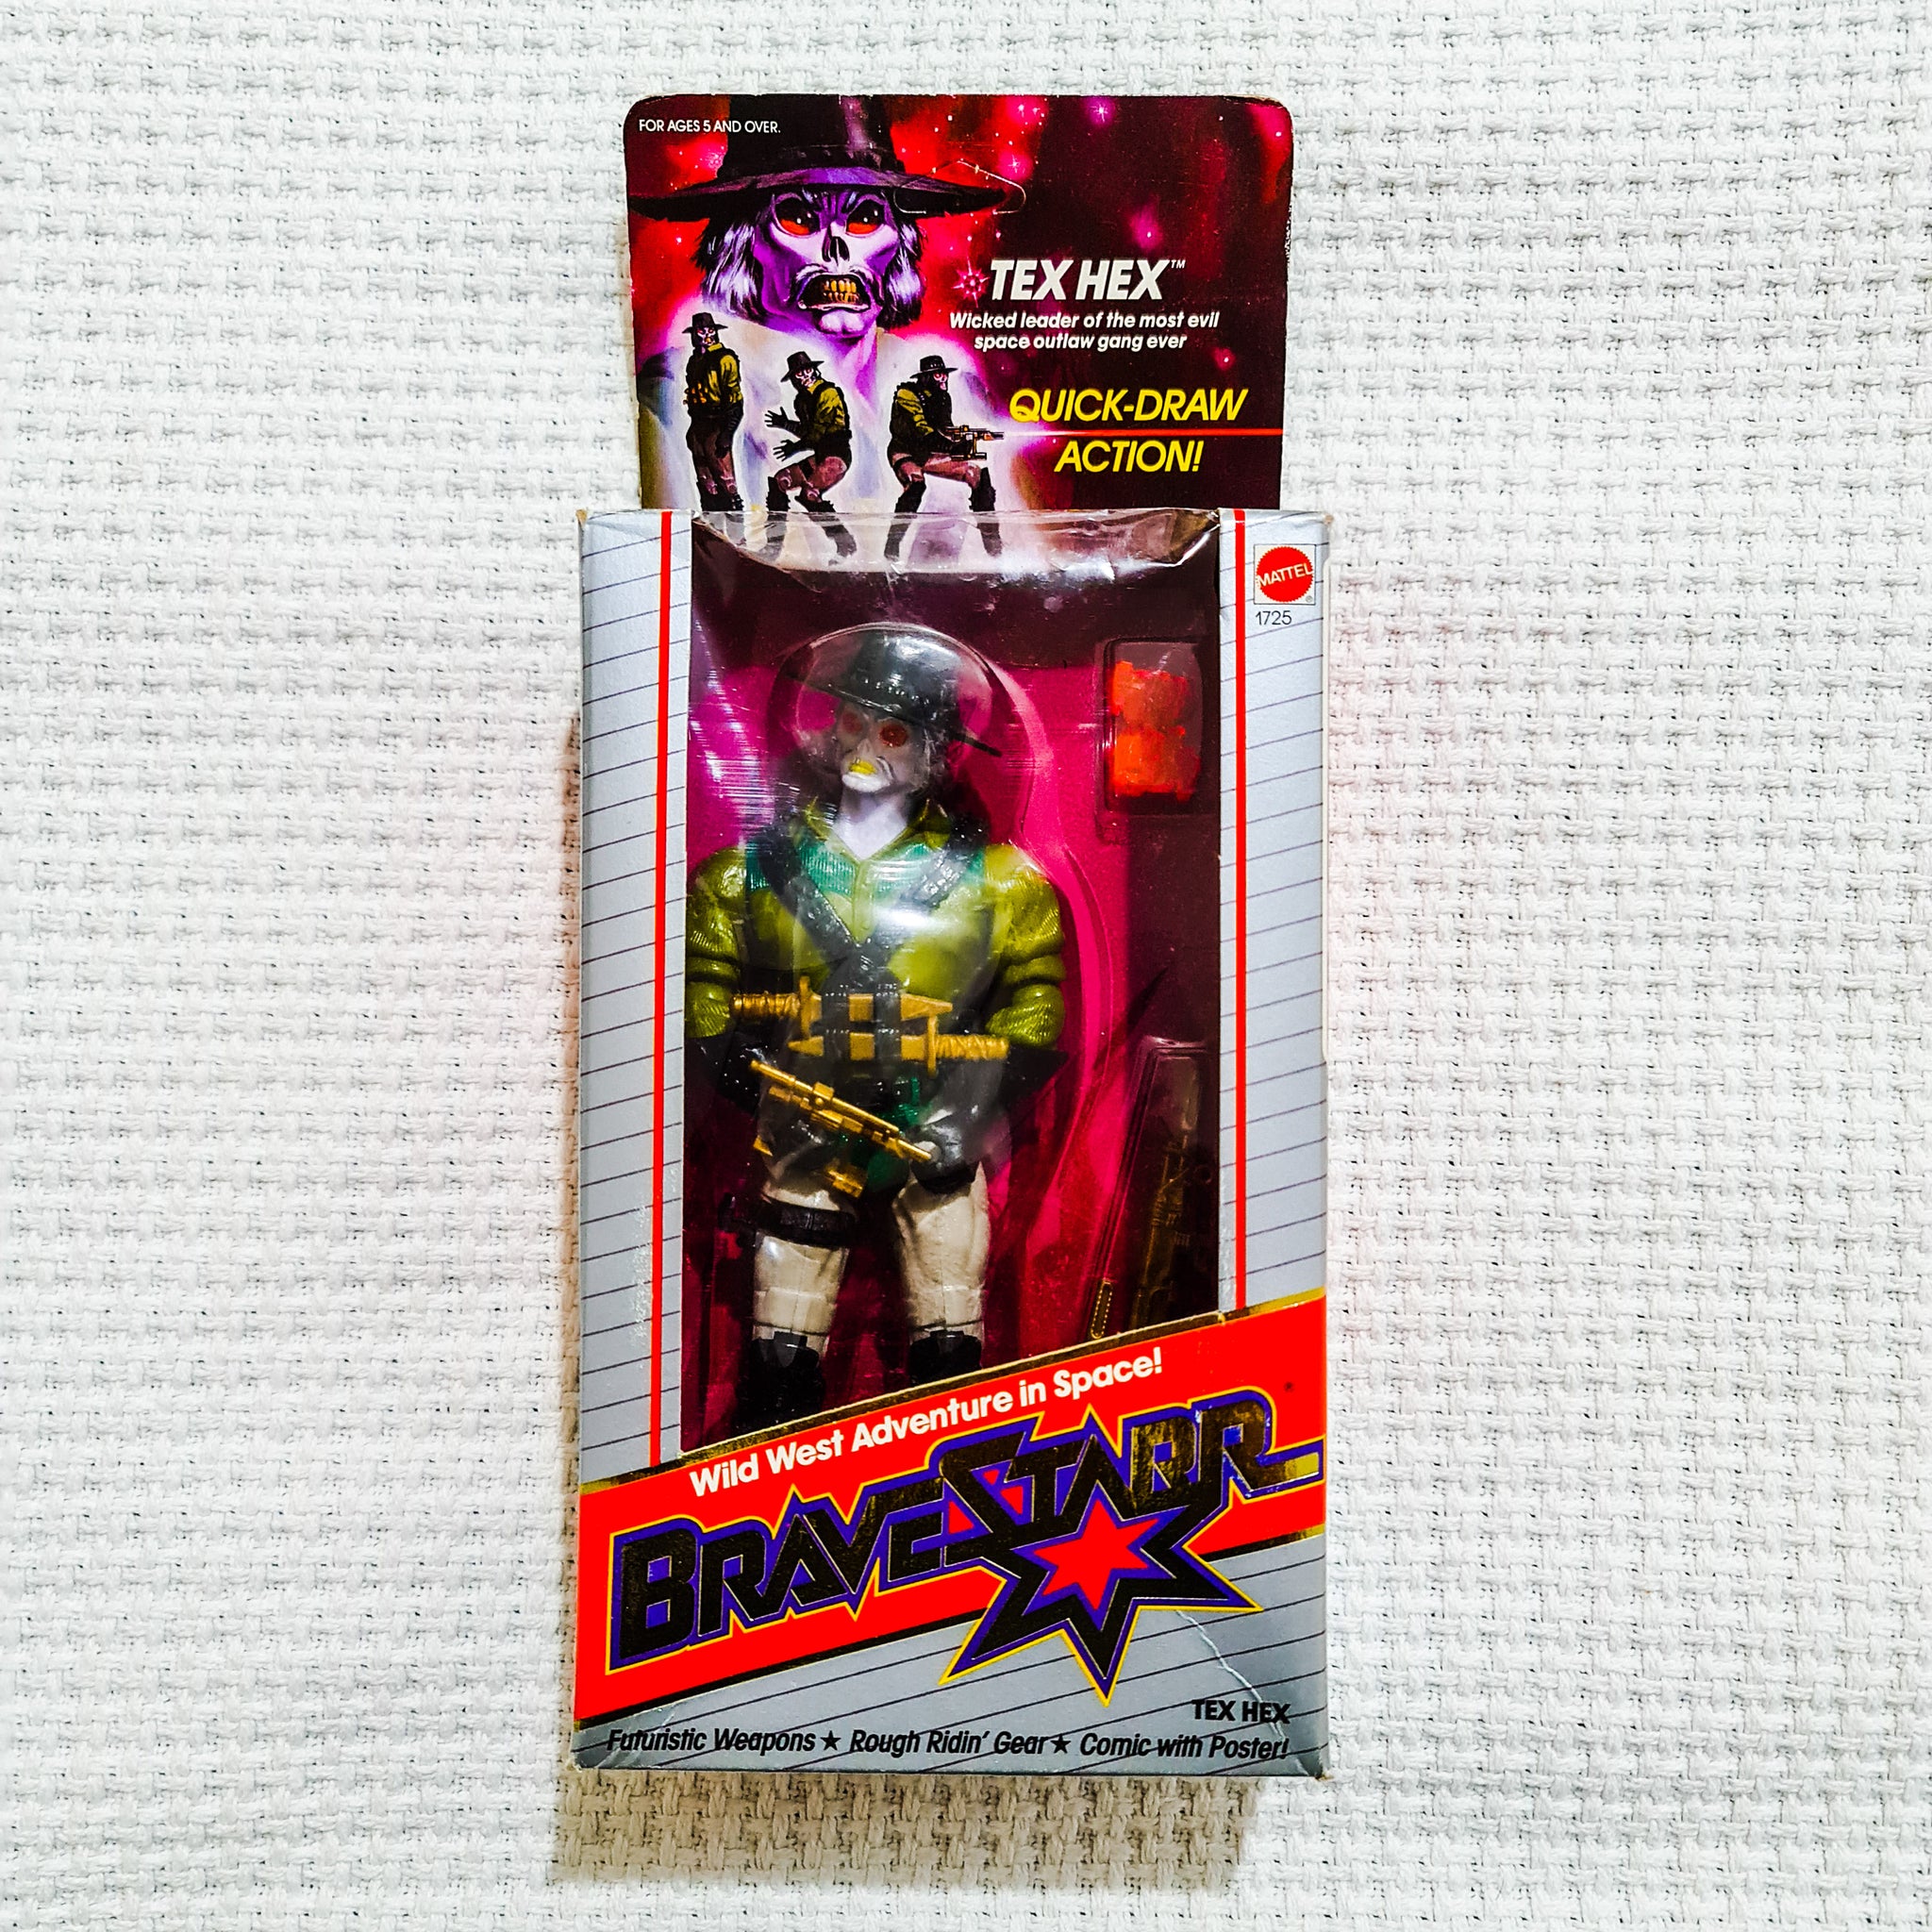 ToySack, Marshall BraveStarr & Tex Hex Bundle (MISB, Excellent Box  Condition) by Mattel, 1987 – ToysAaack